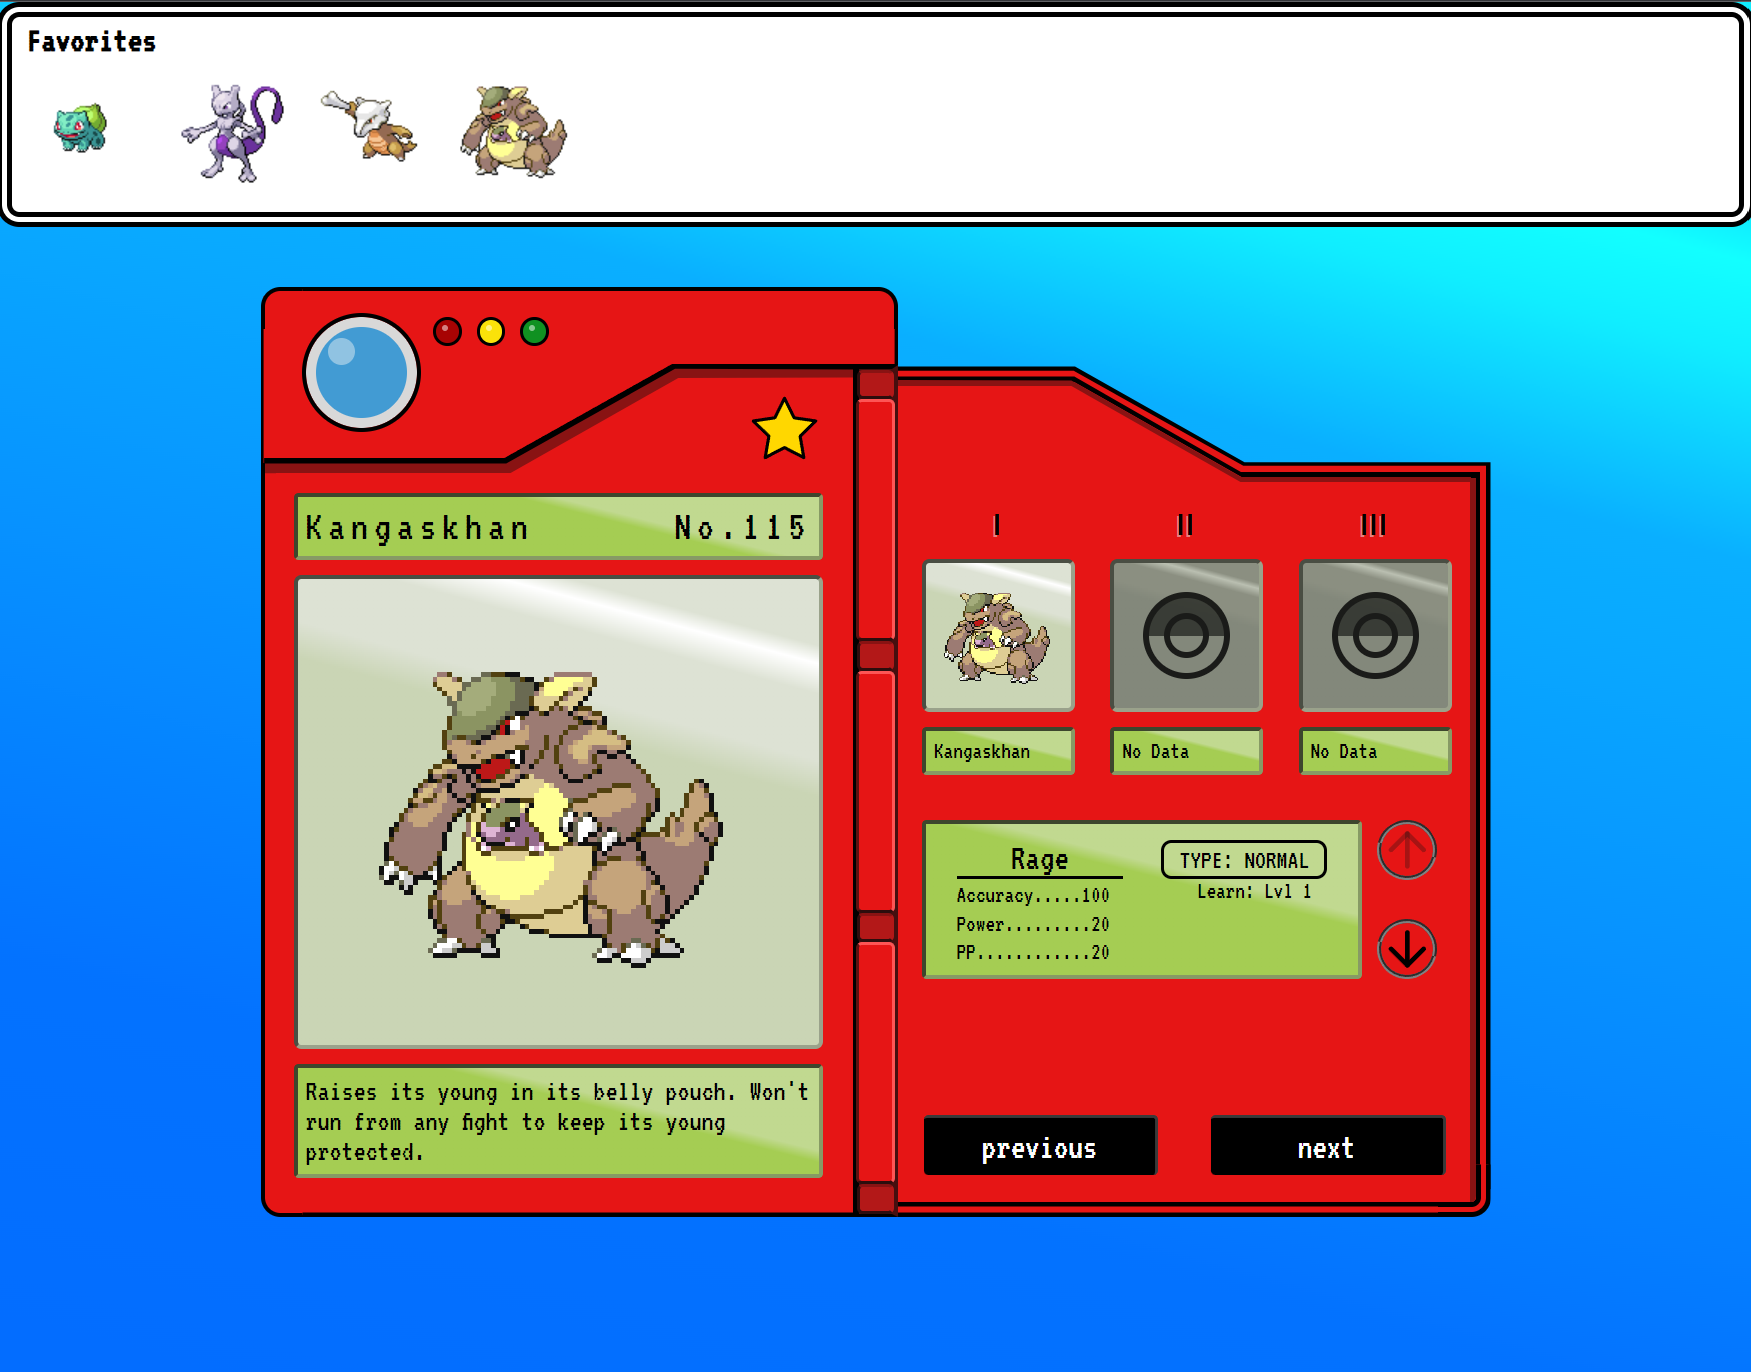 a screenshot of the pokedex we will build throughout this guide